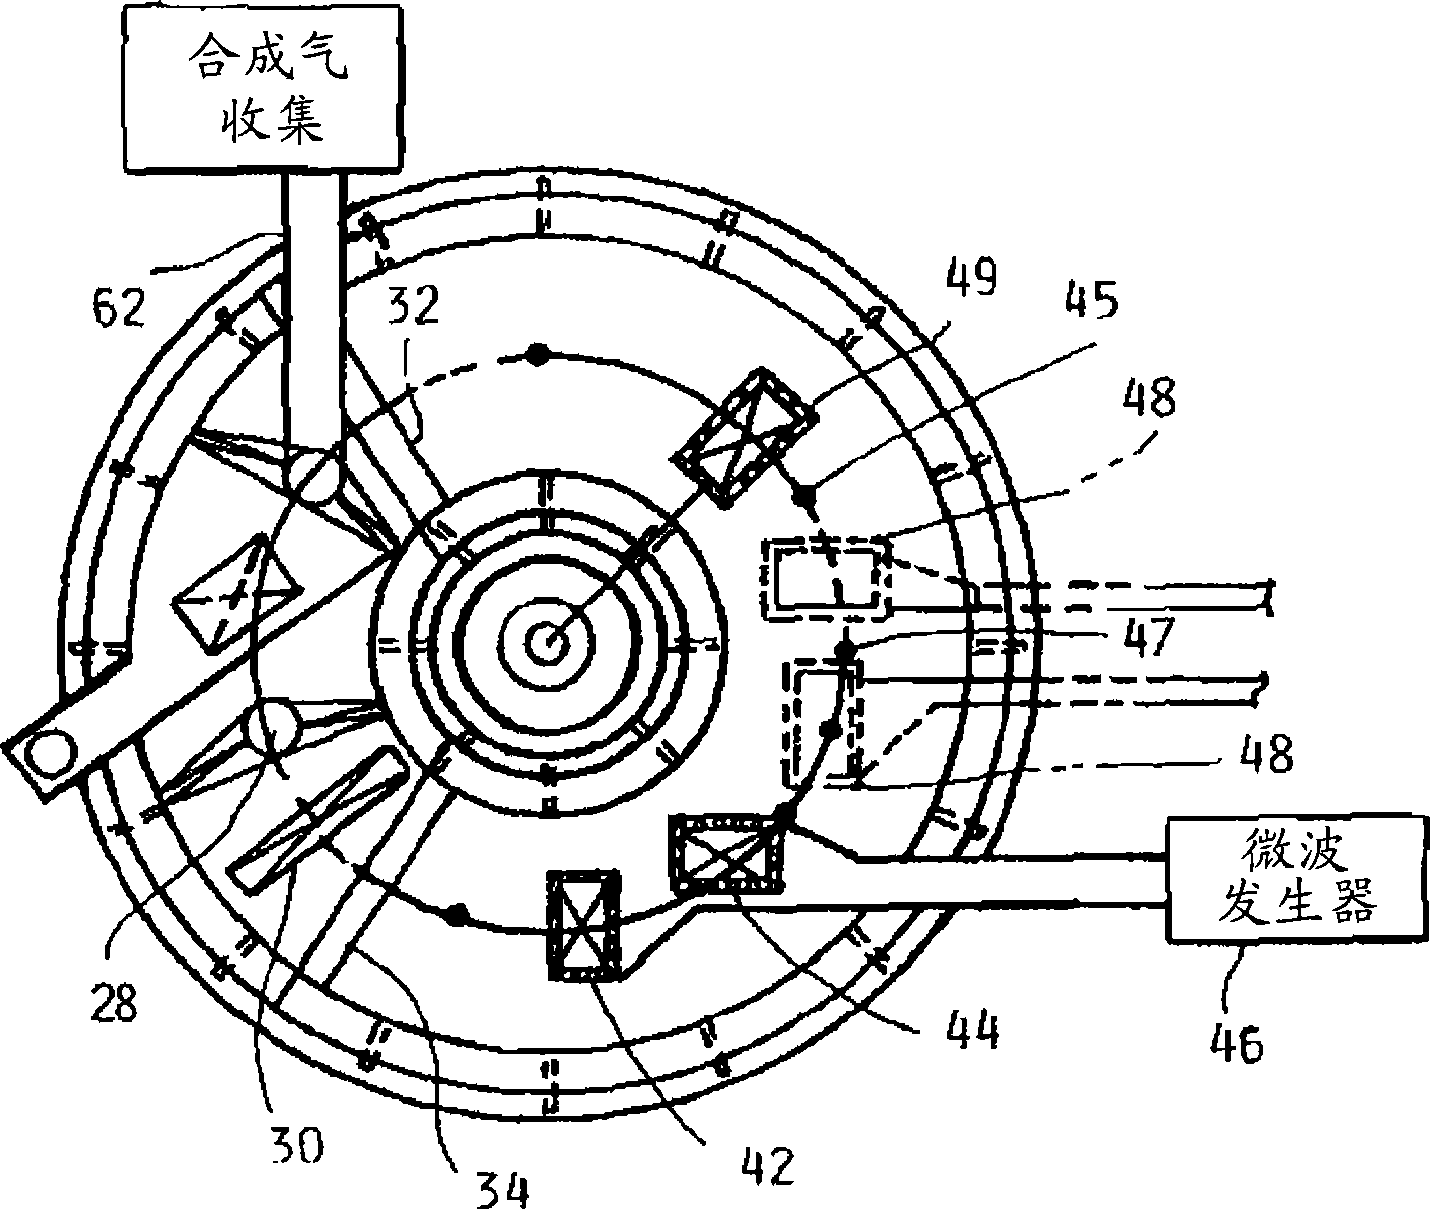 Microwave heating method and apparatus for iron oxide reduction